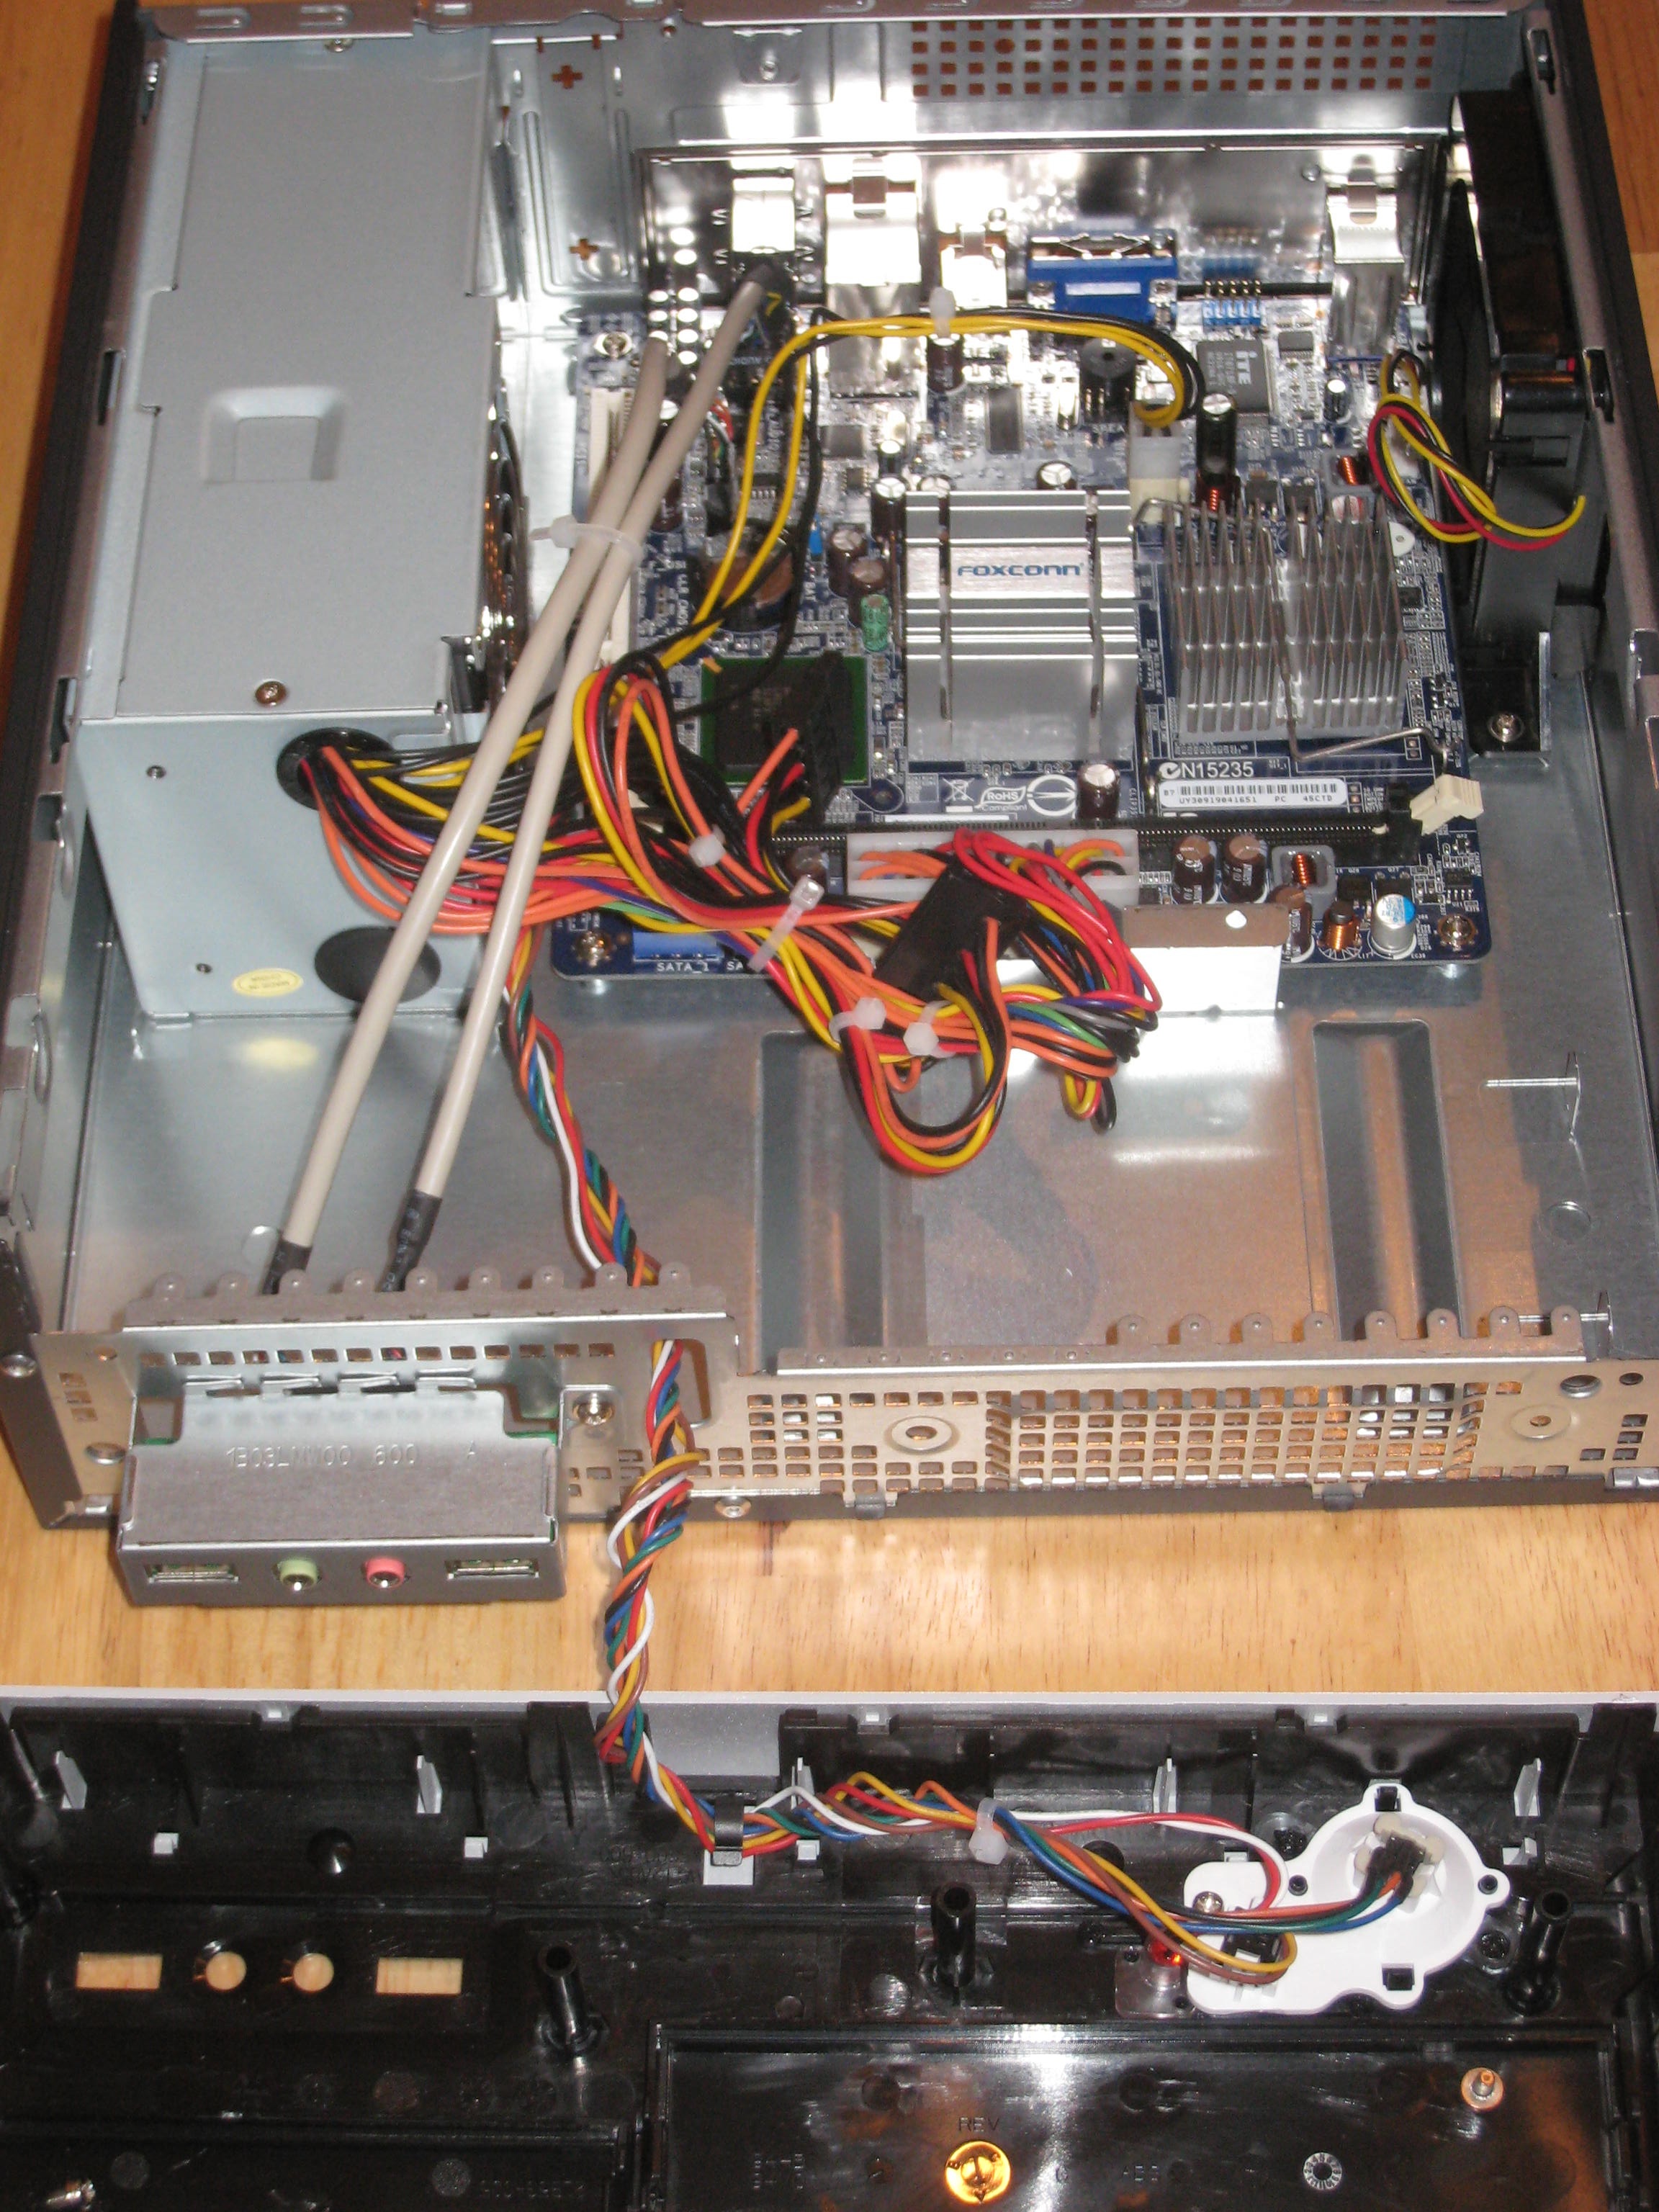 Closeup of the inside of the computer